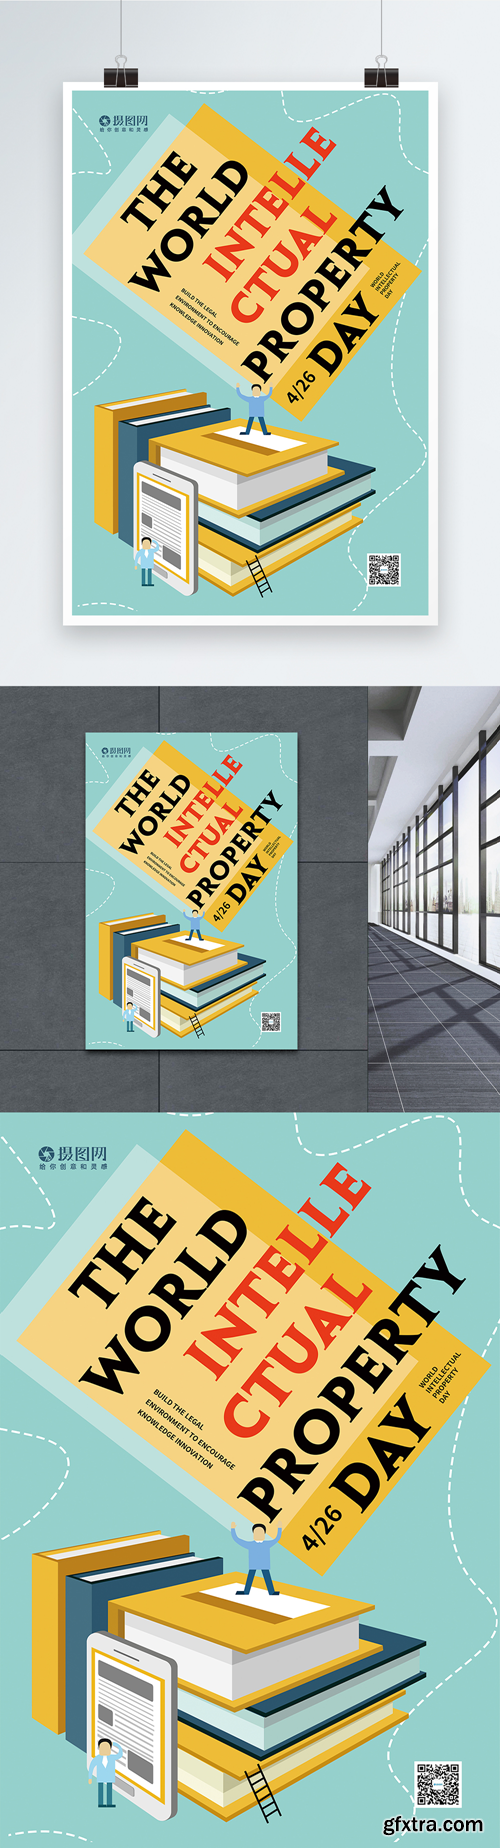 english posters for world intellectual property day